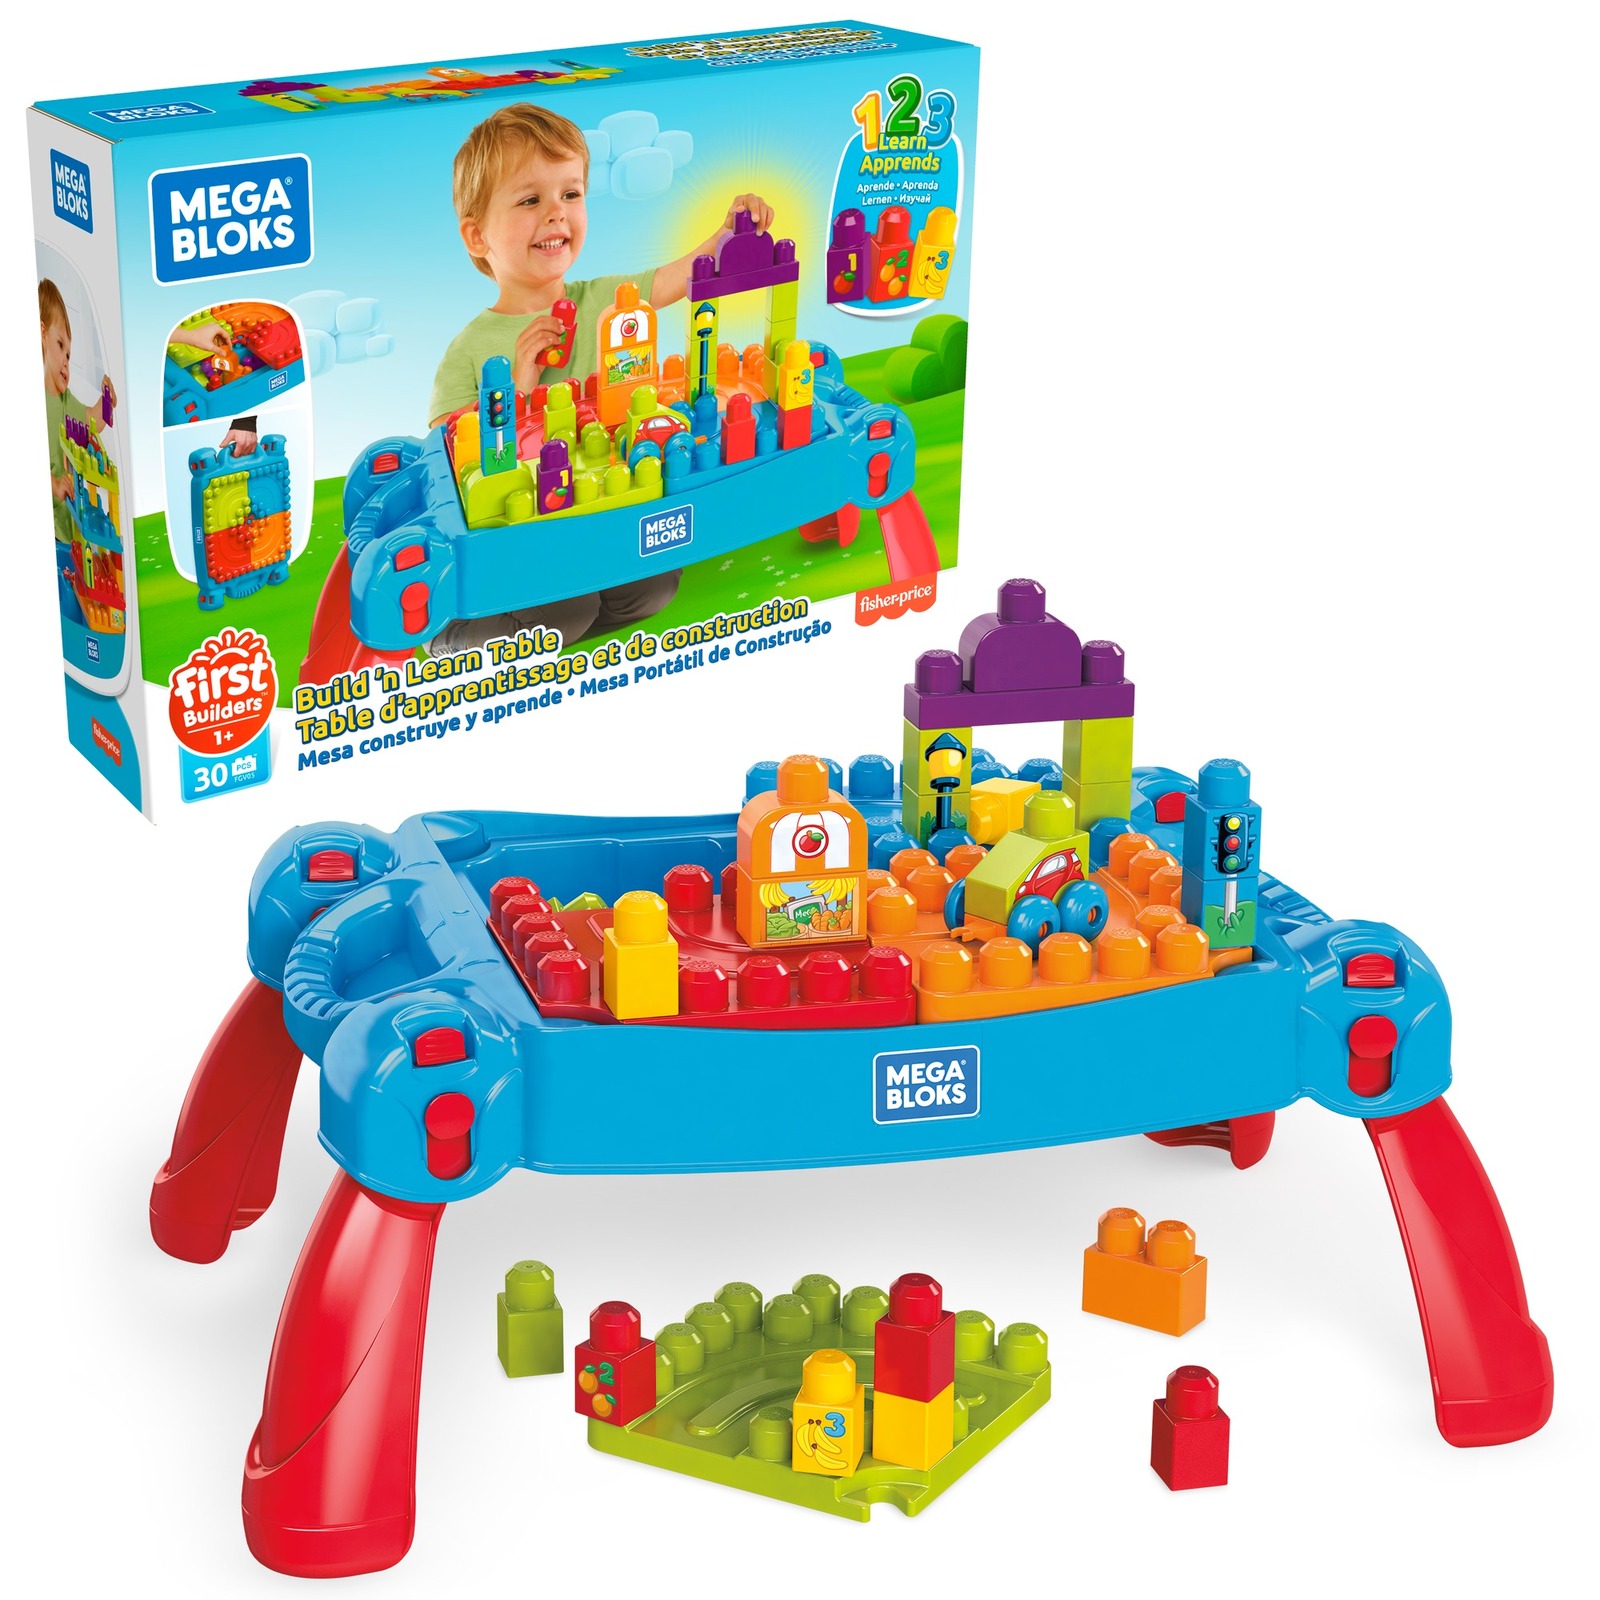 Mega Bloks First Builders Build 'N Learn Table with Big Building Blocks Kids Toy